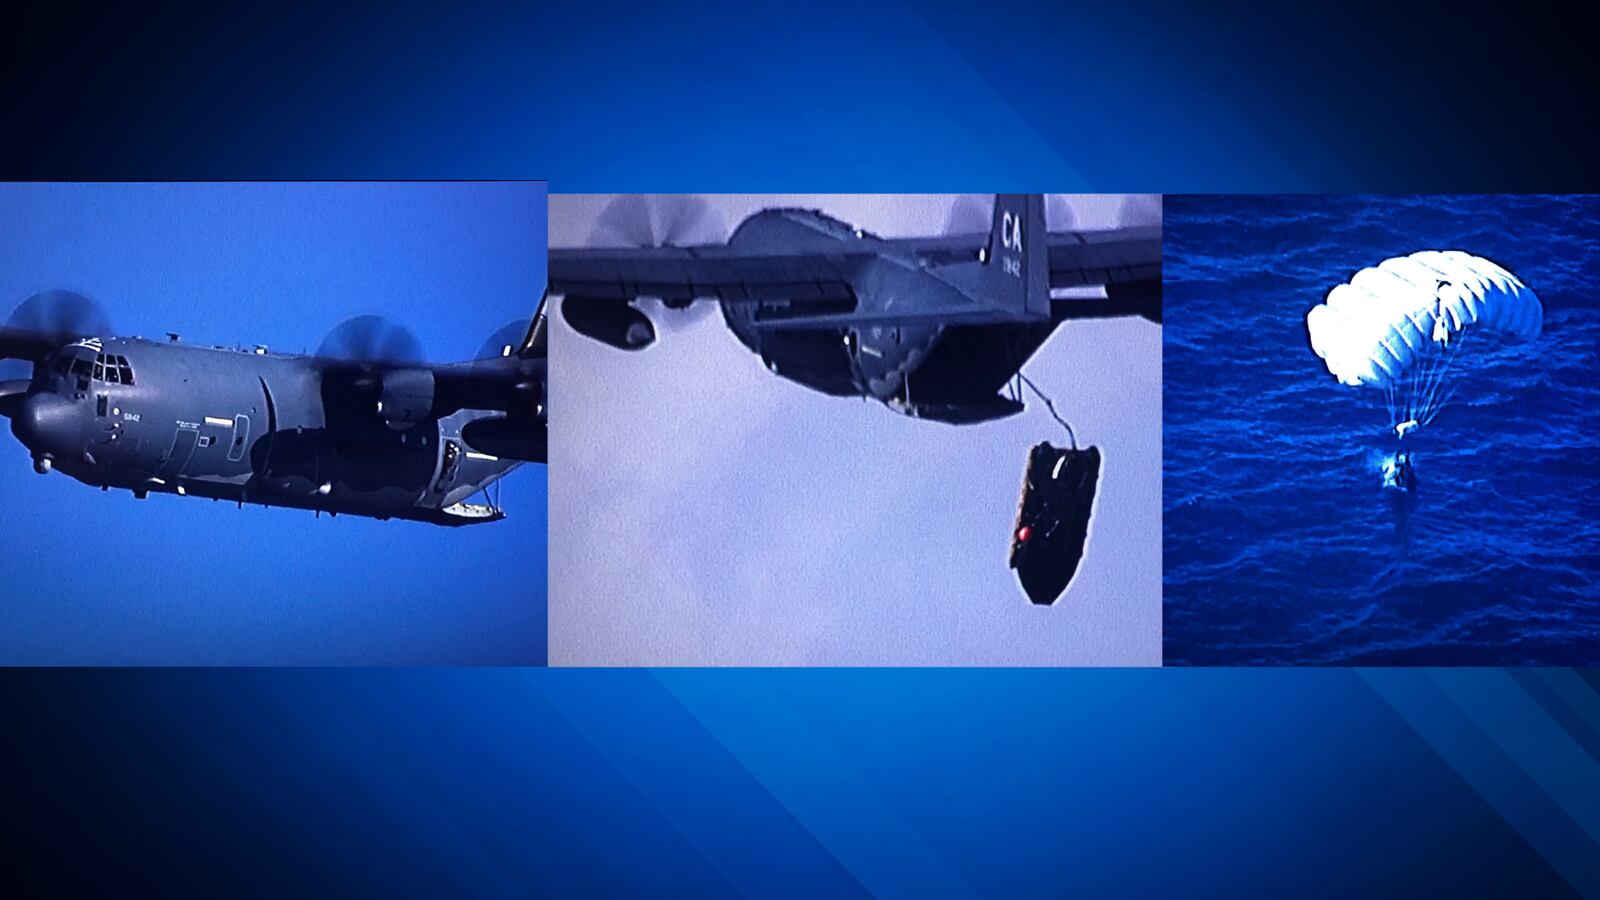 Have you seen them? City of Boston explains why military helicopters